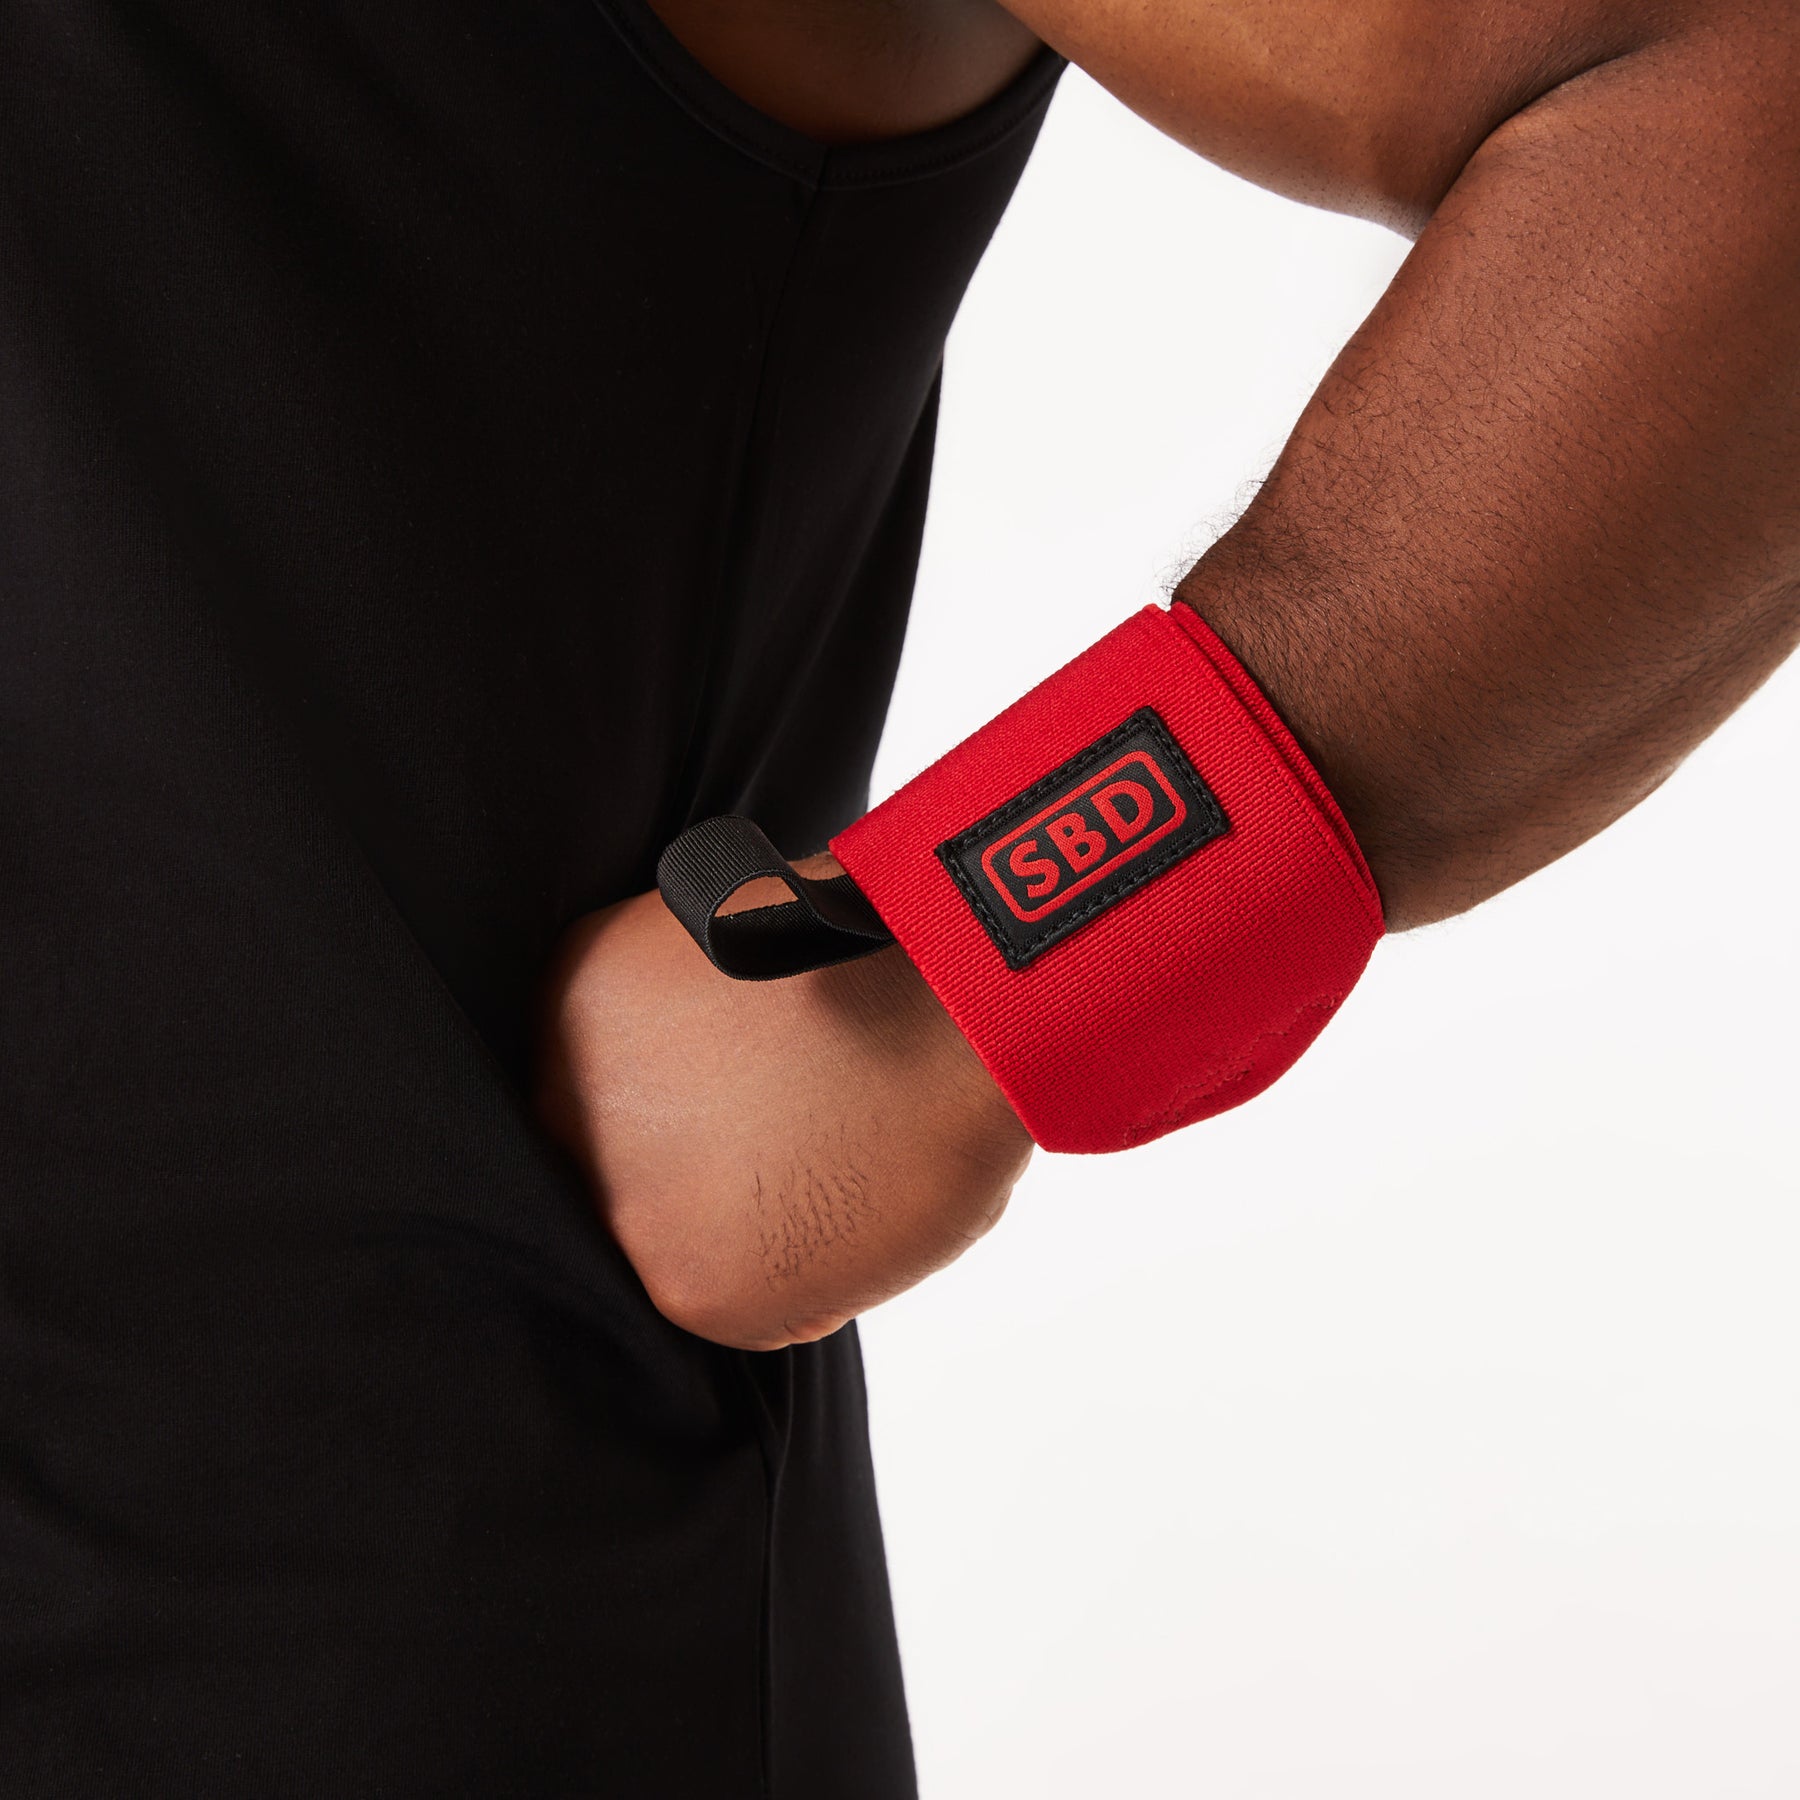 Rip Toned Wrist Wraps - 18 Thumb Loops - Wrist Support